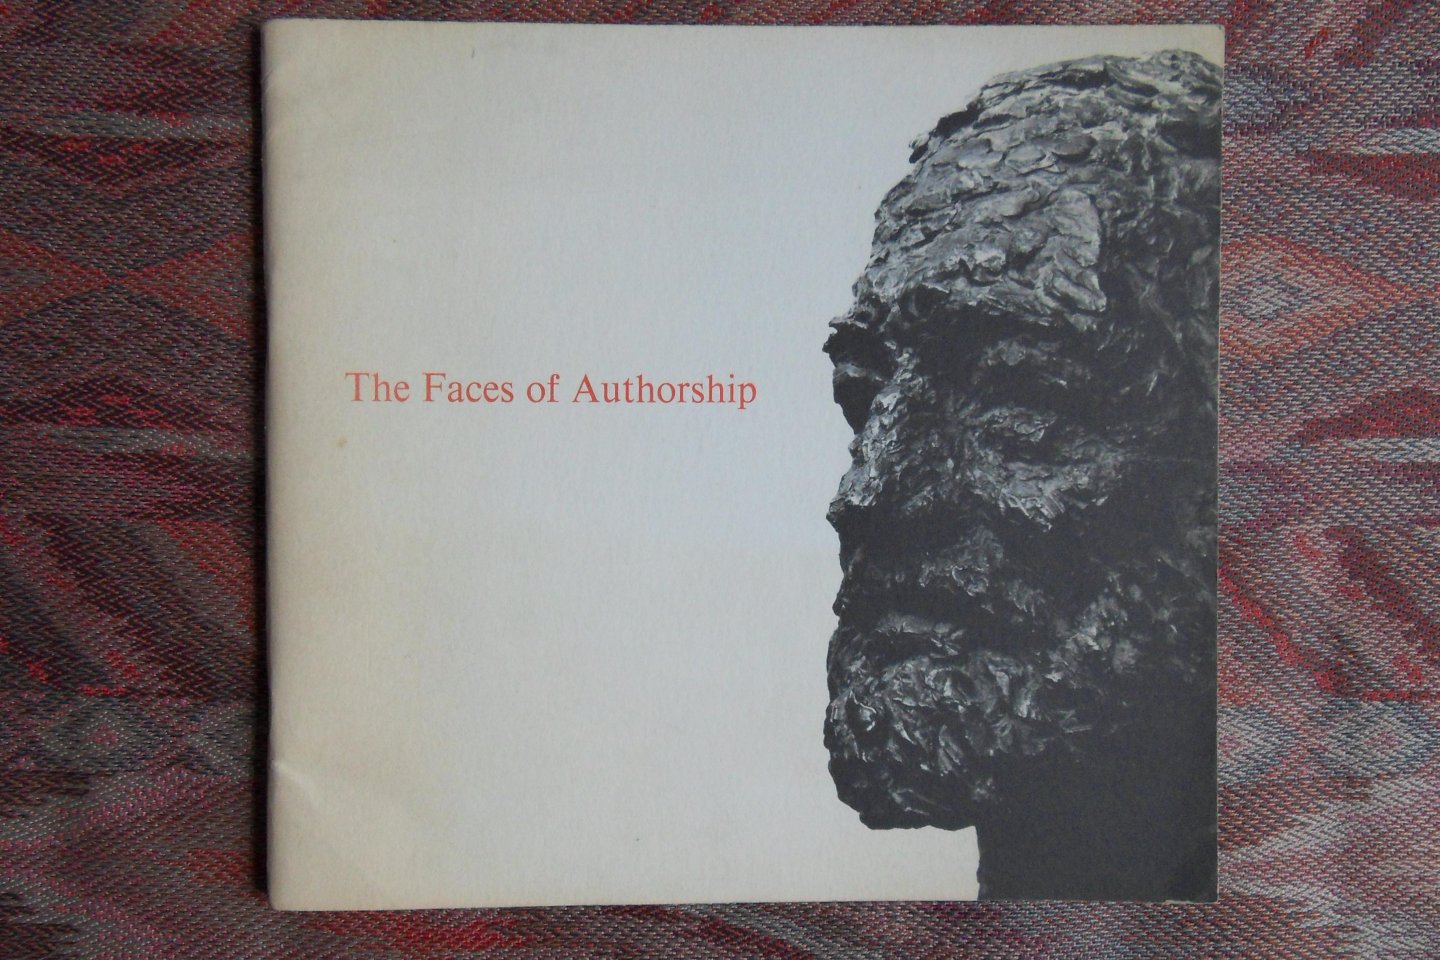 Ransom, Harry (voorwoord). - The Faces of Authorship. - An Exhibition of Twentieth Century Literary Portraits from the Humanities Research Center Collections.